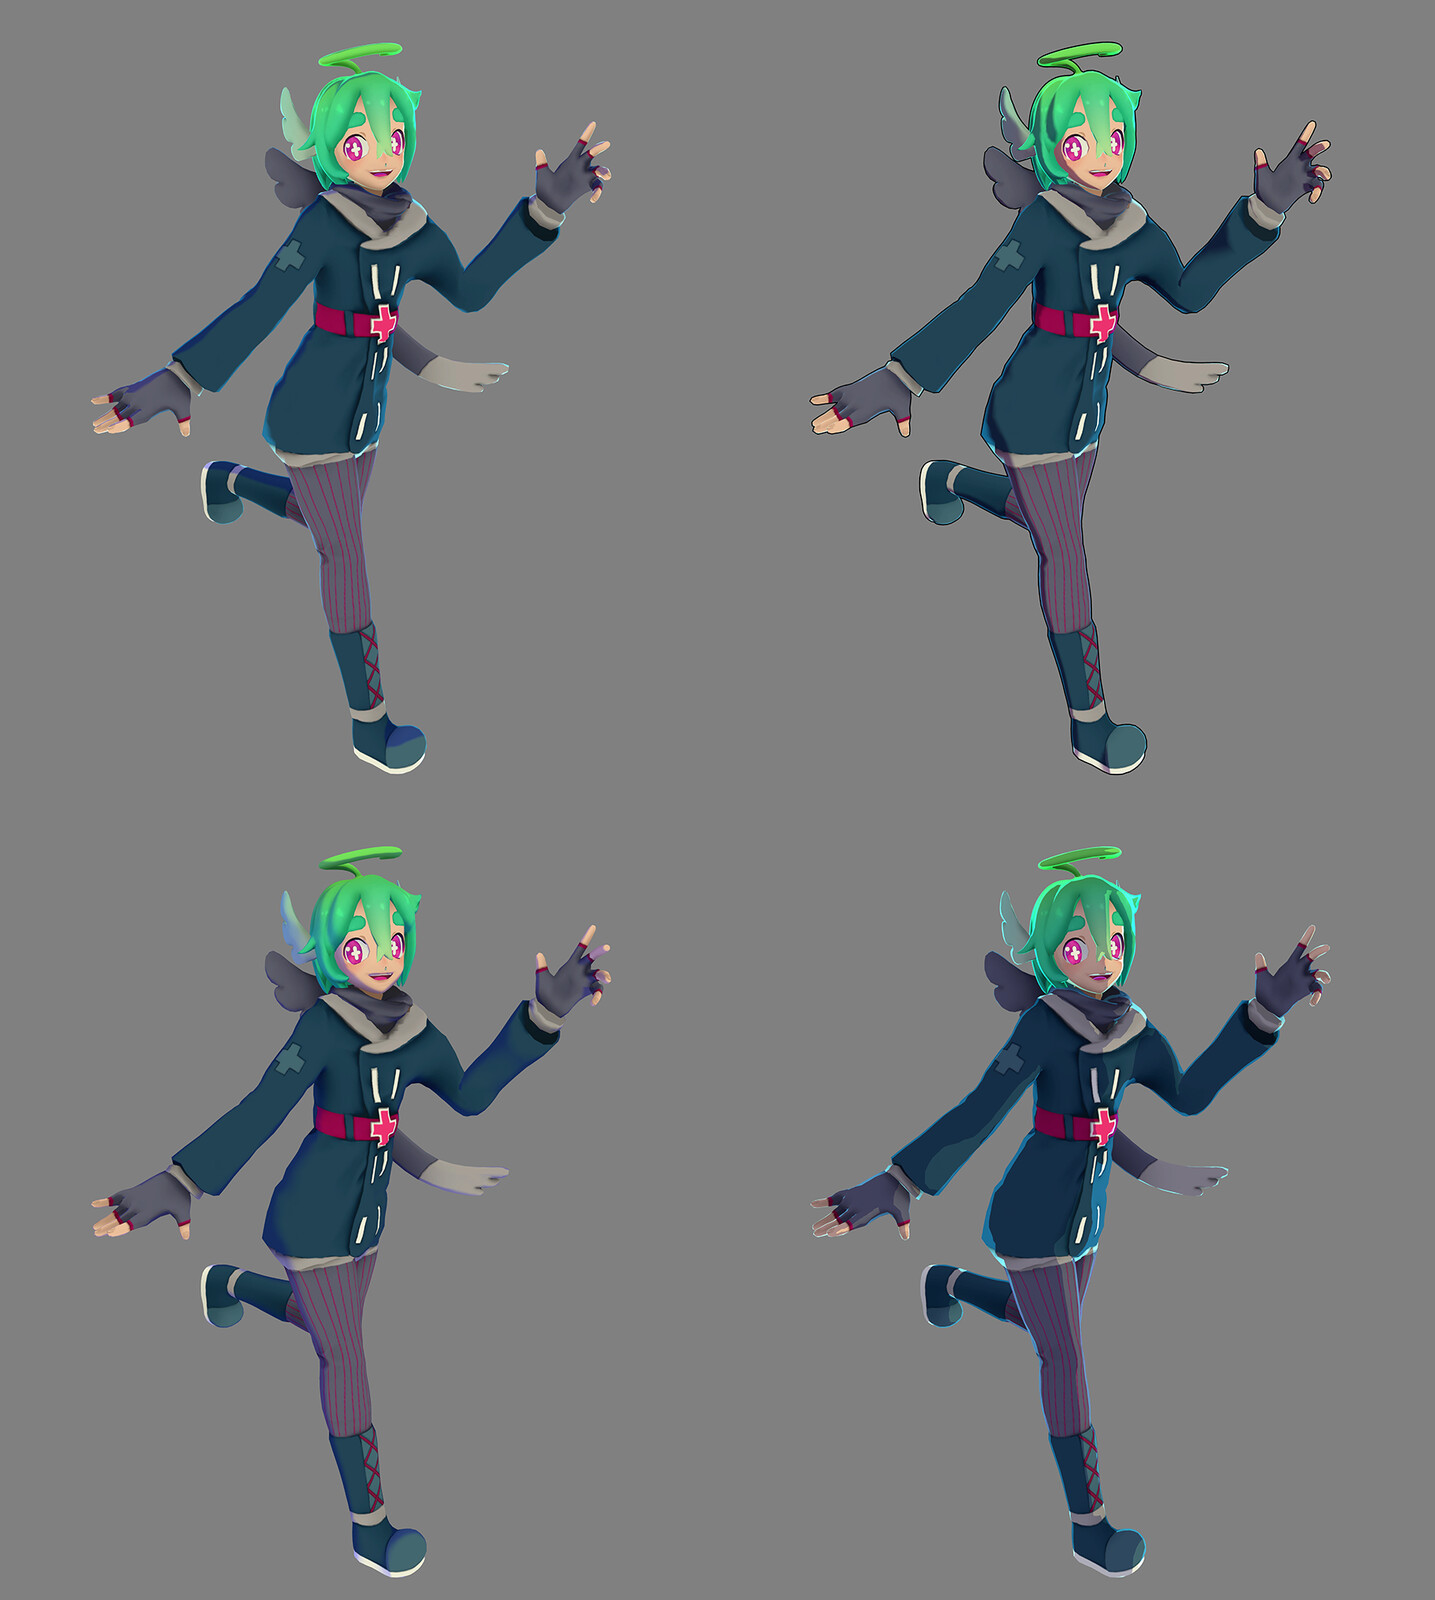 Additional renders with different toon shader settings